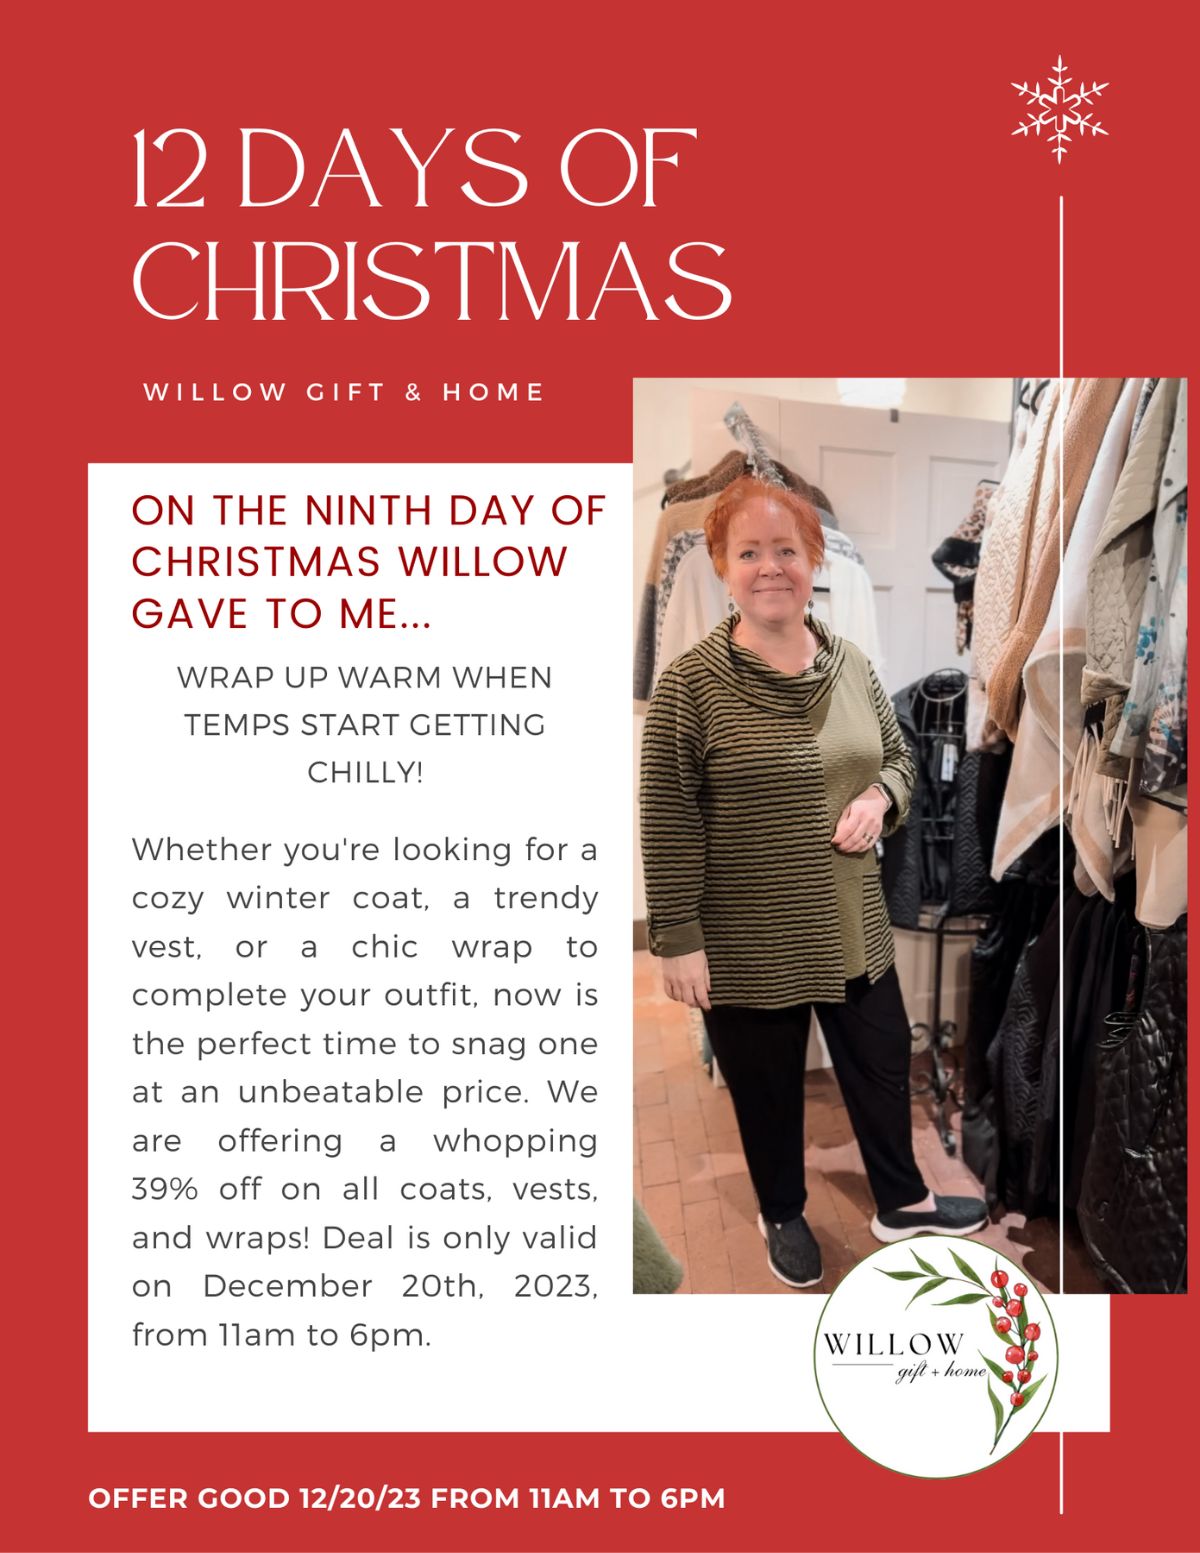 On the 9th Day of Christmas Willow gave to me 39% off coats, vests and wraps